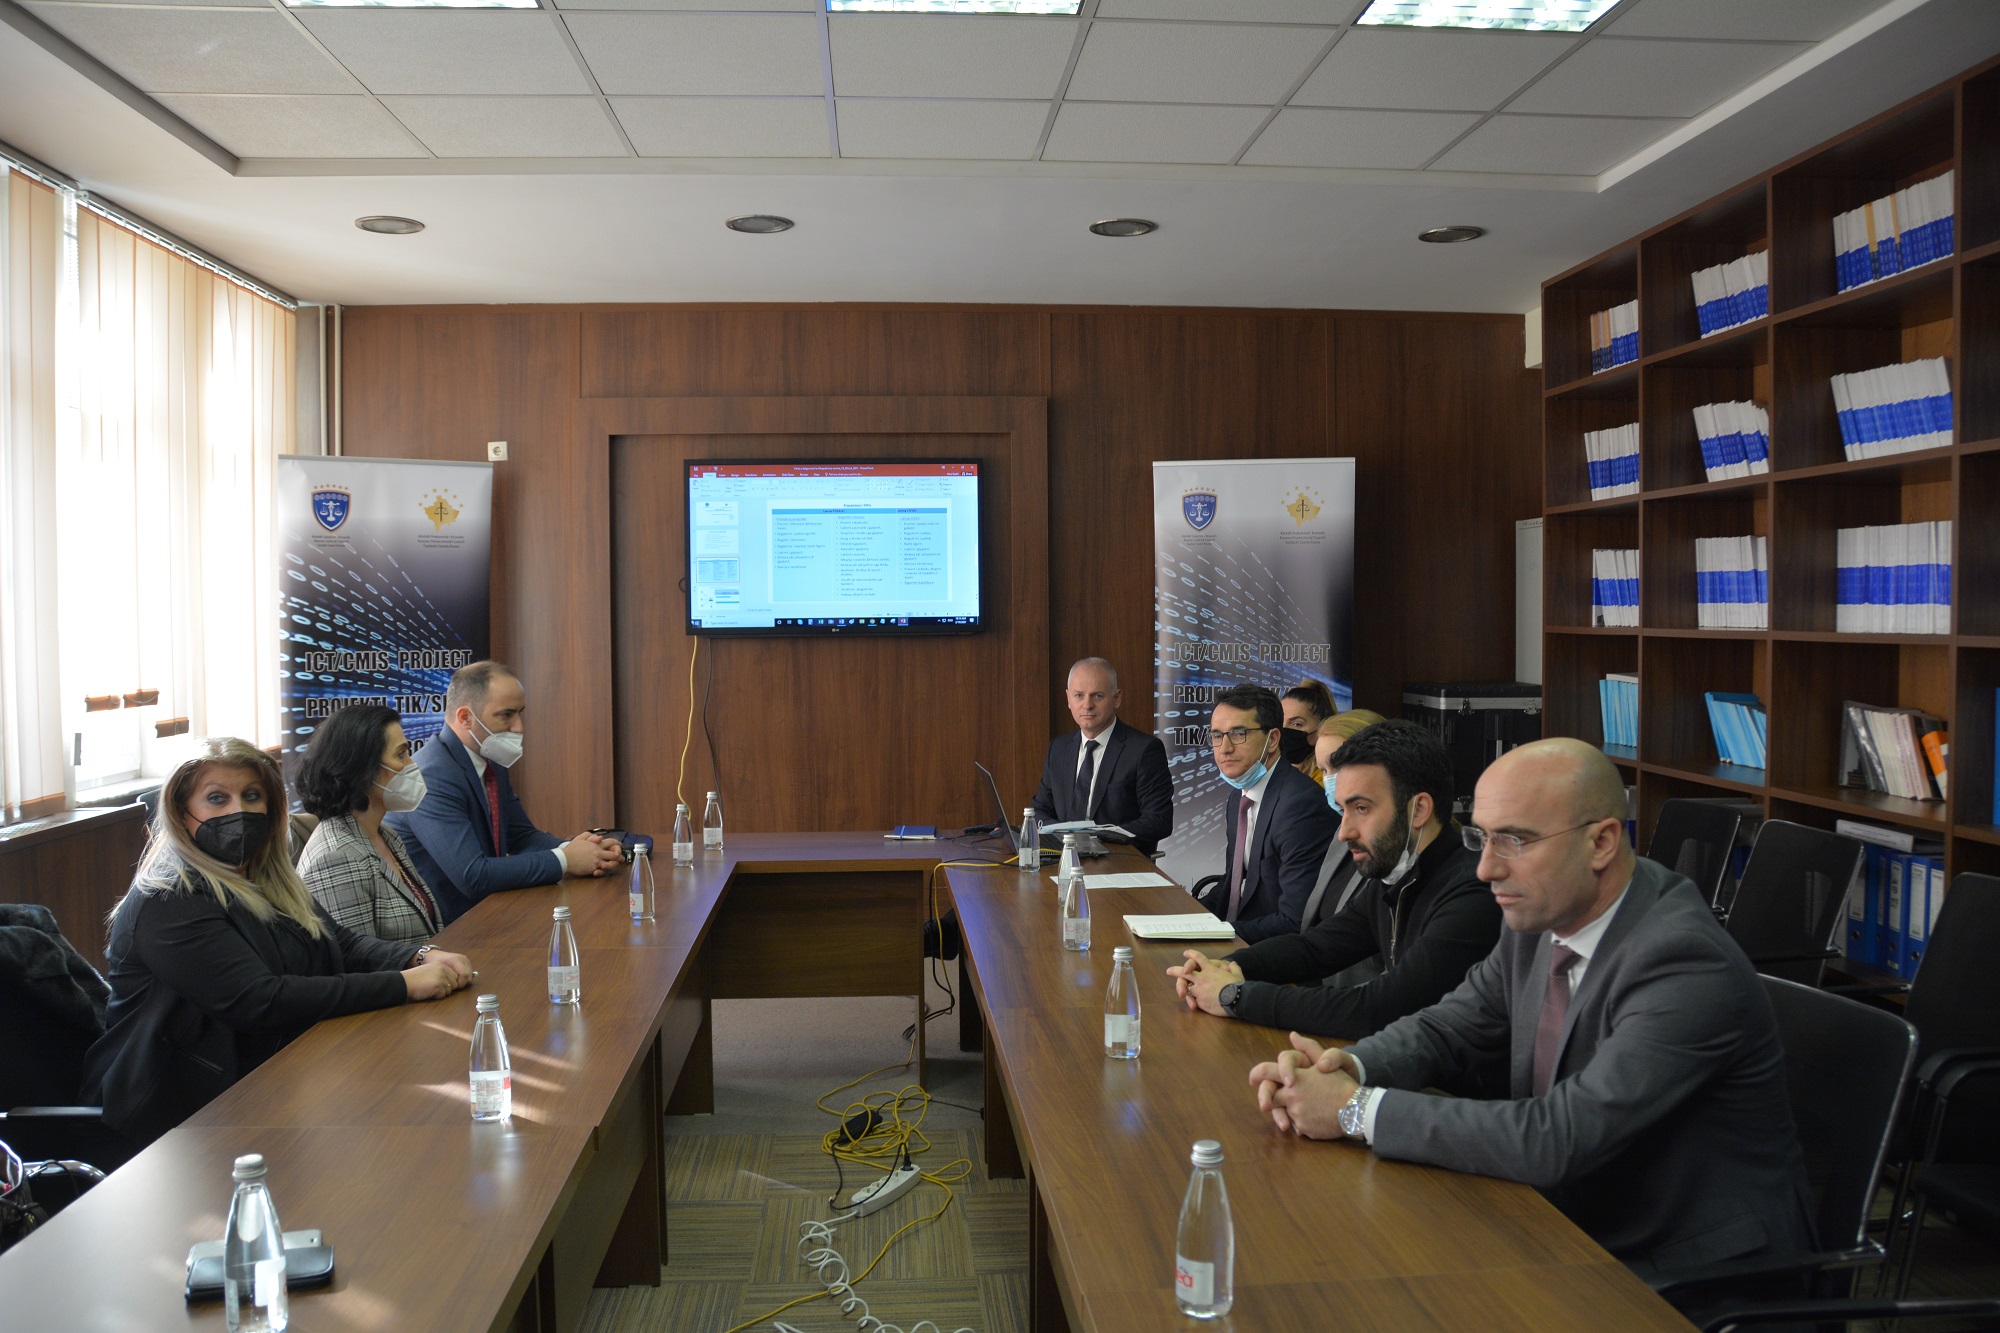 KJC hosted a meeting with representatives of justice institutions from Northern Macedonia